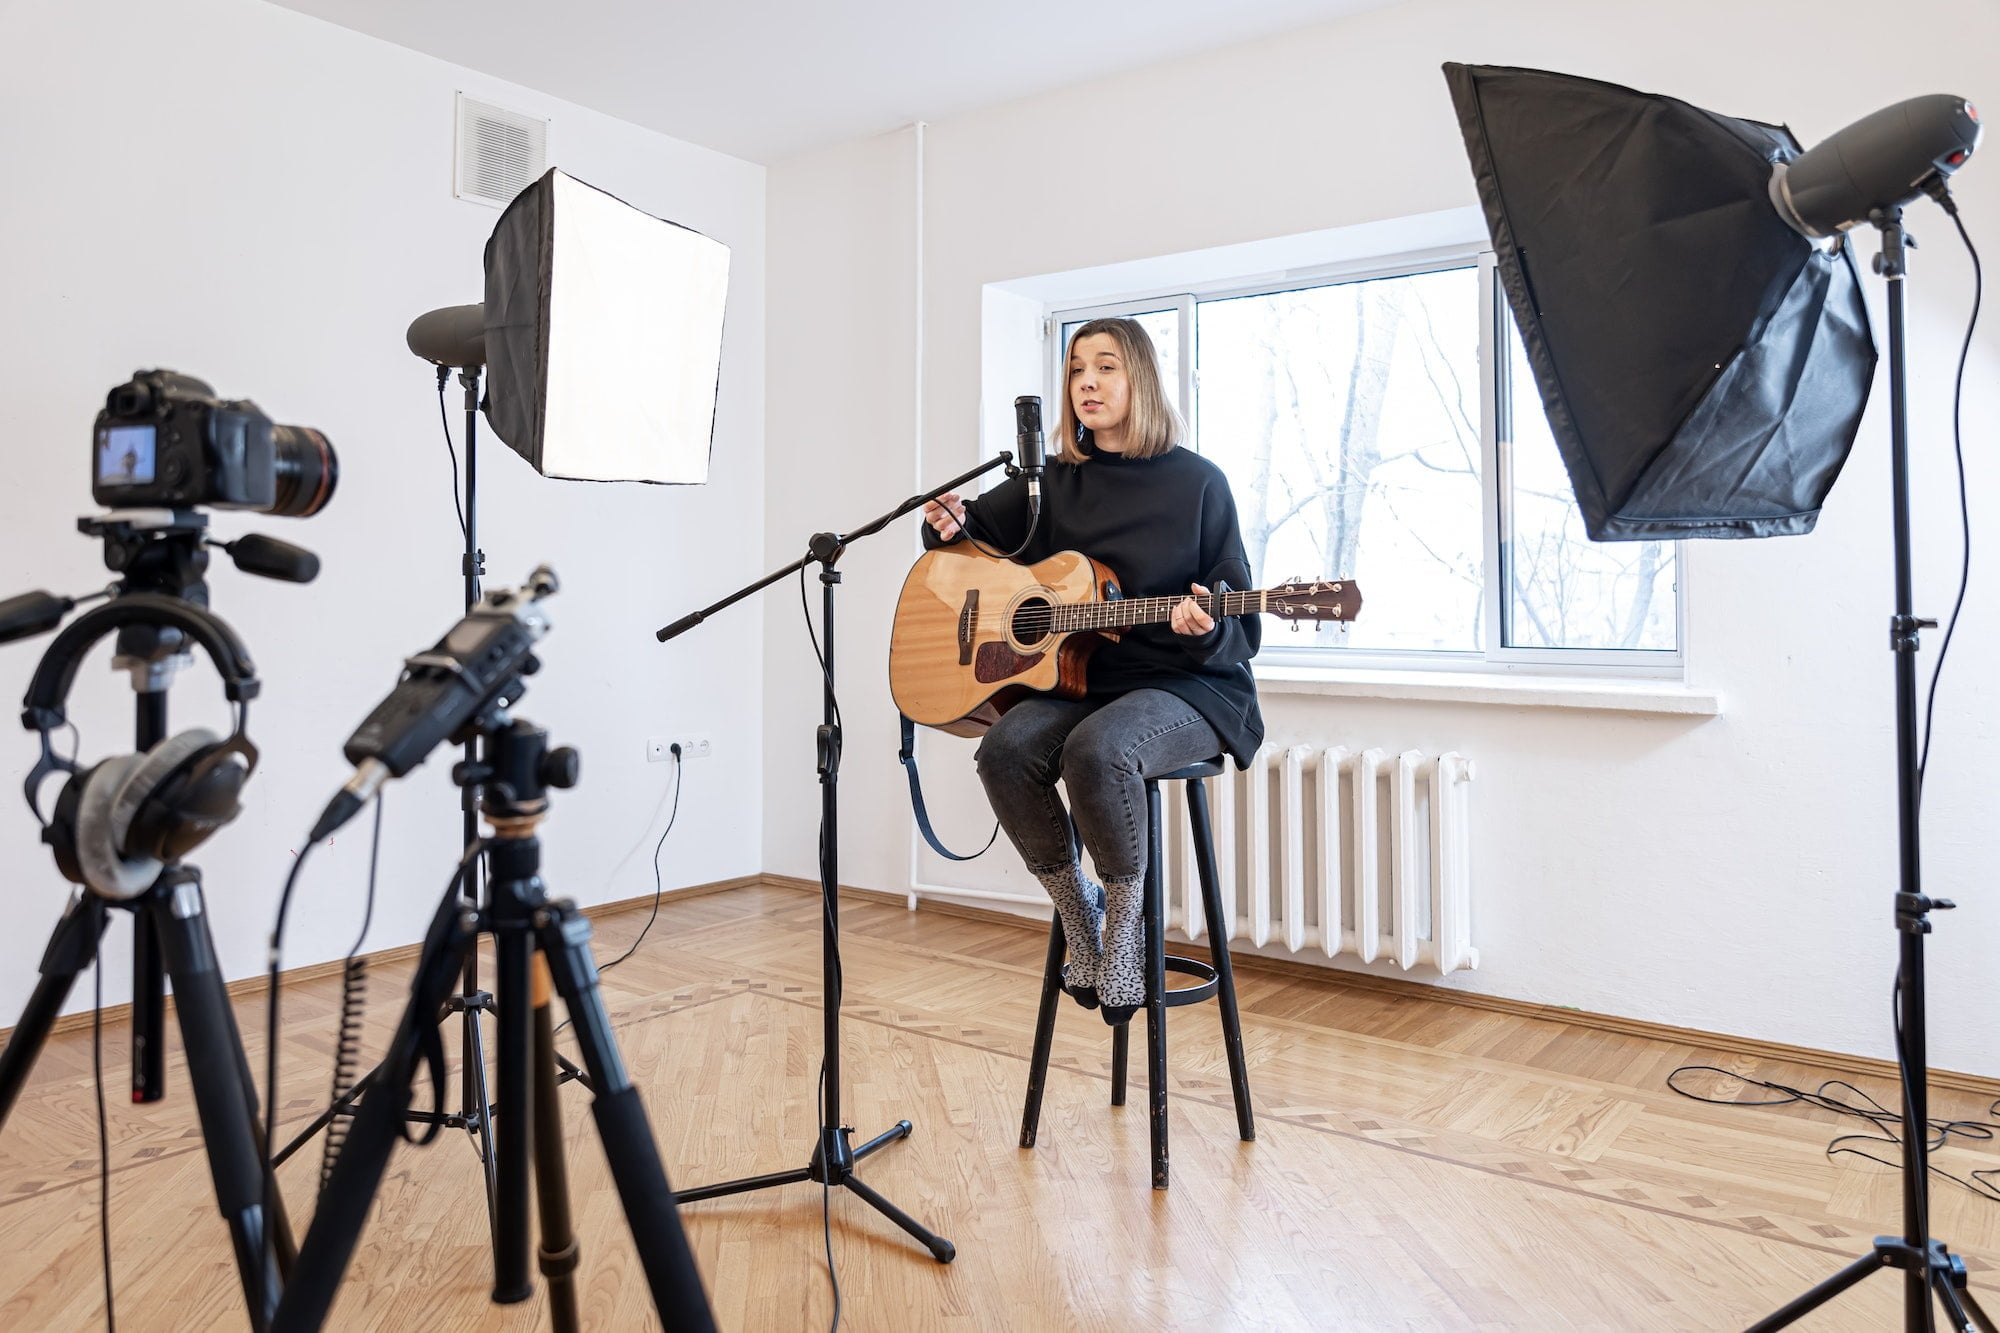 A young girl plays the guitar, recording video and sound.